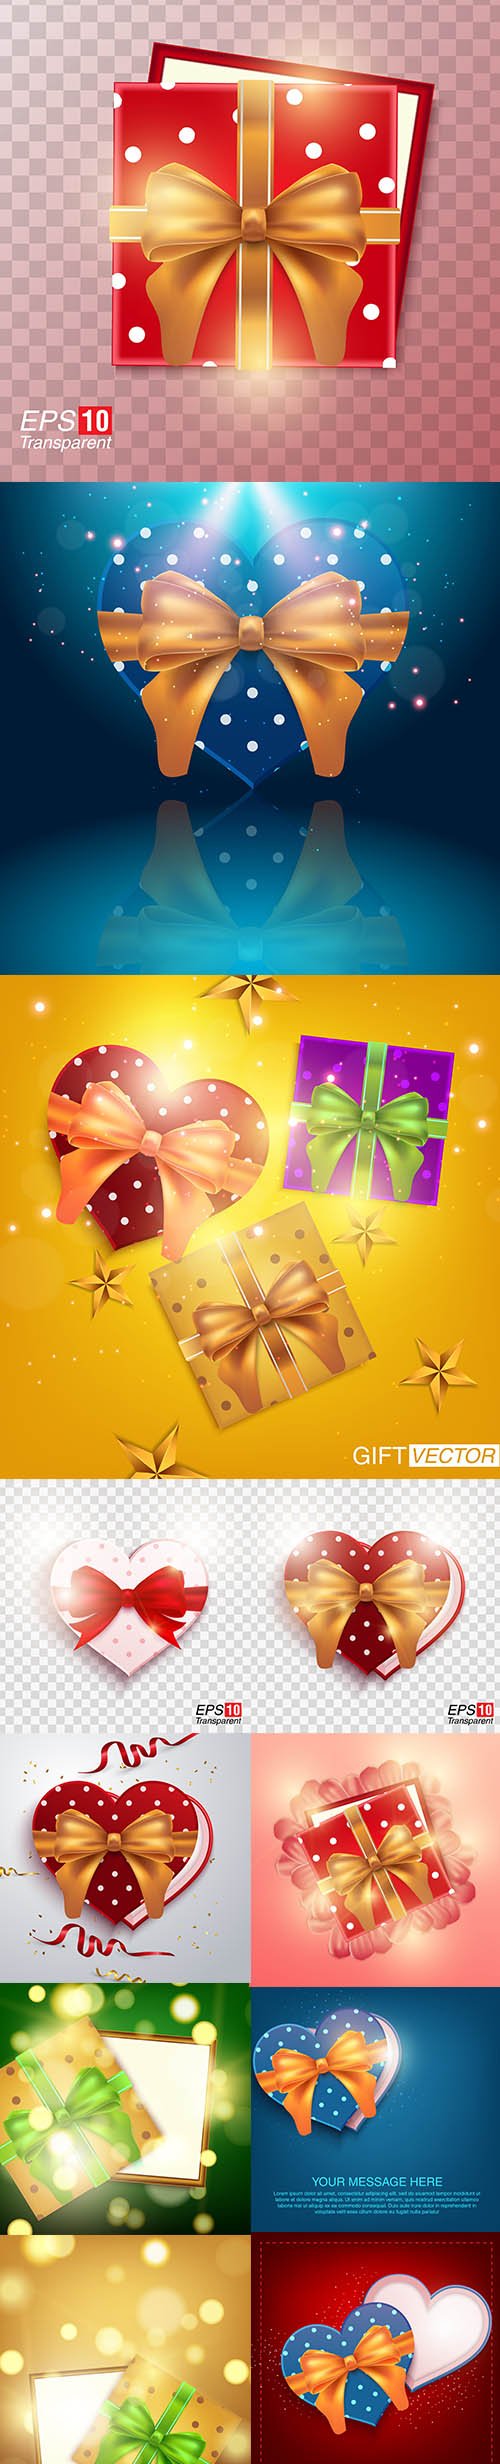 Realistic Collection with Colorful Gift Box